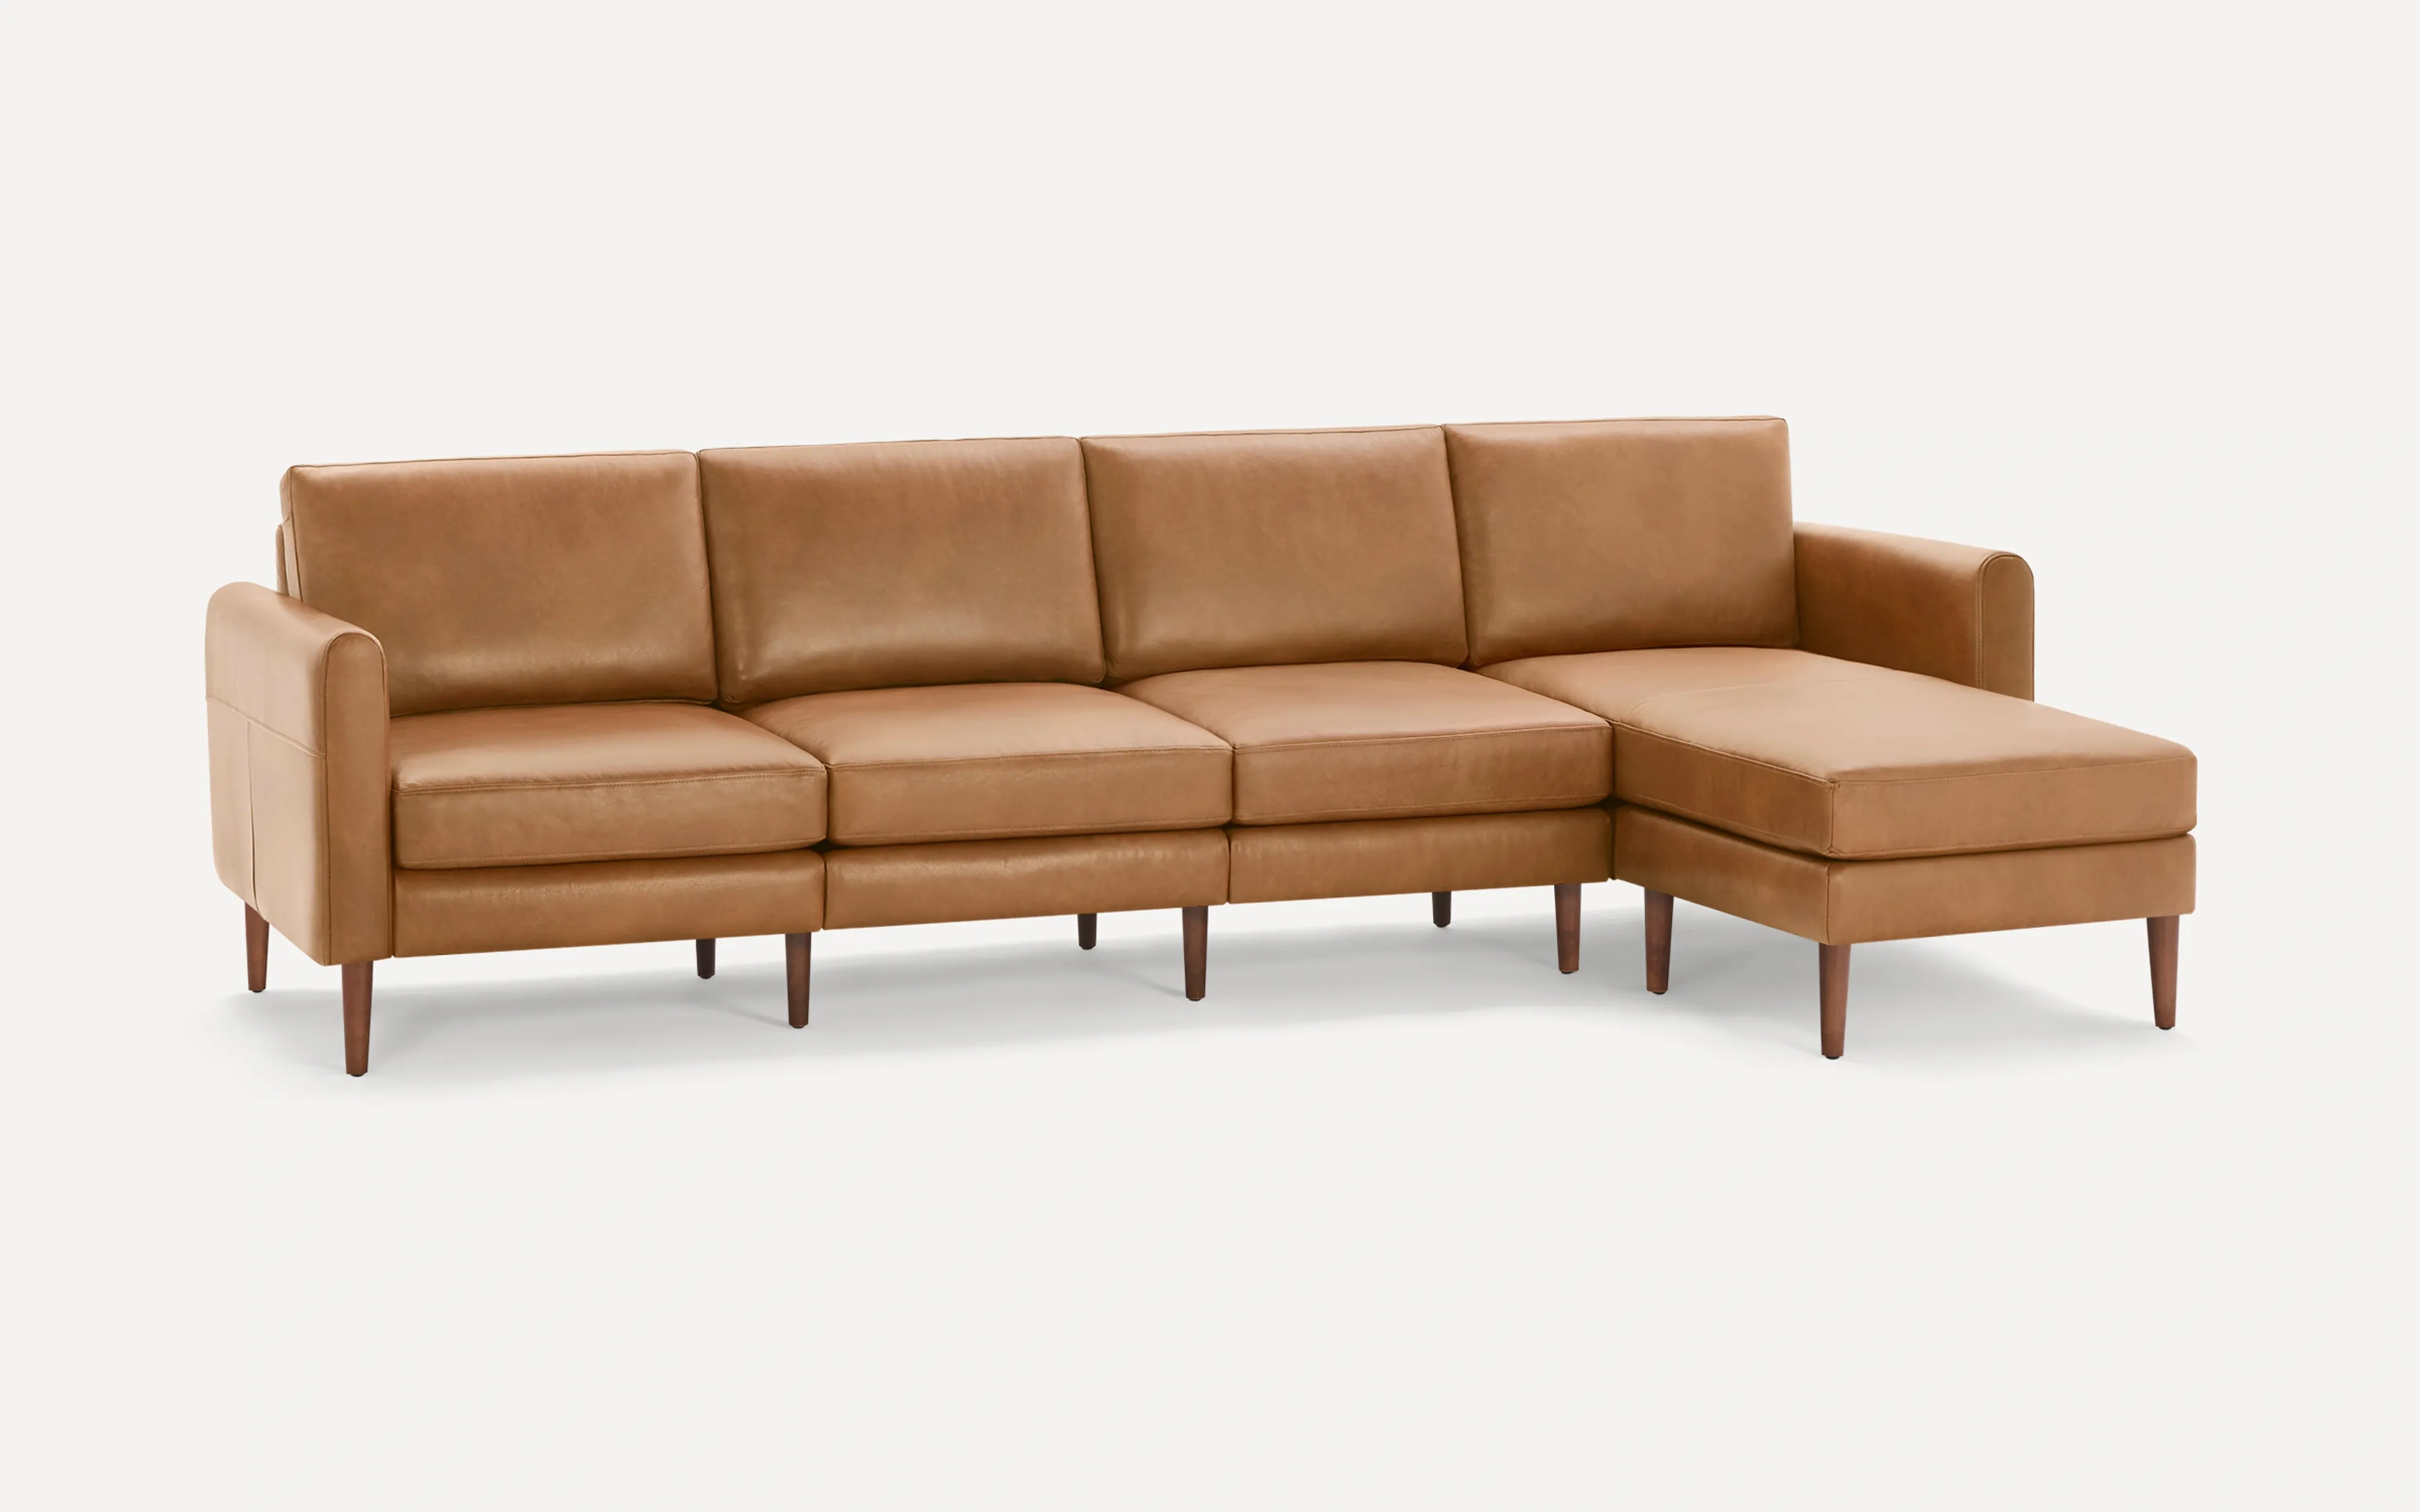 Original Nomad Chaise King Sofa in Camel Leather